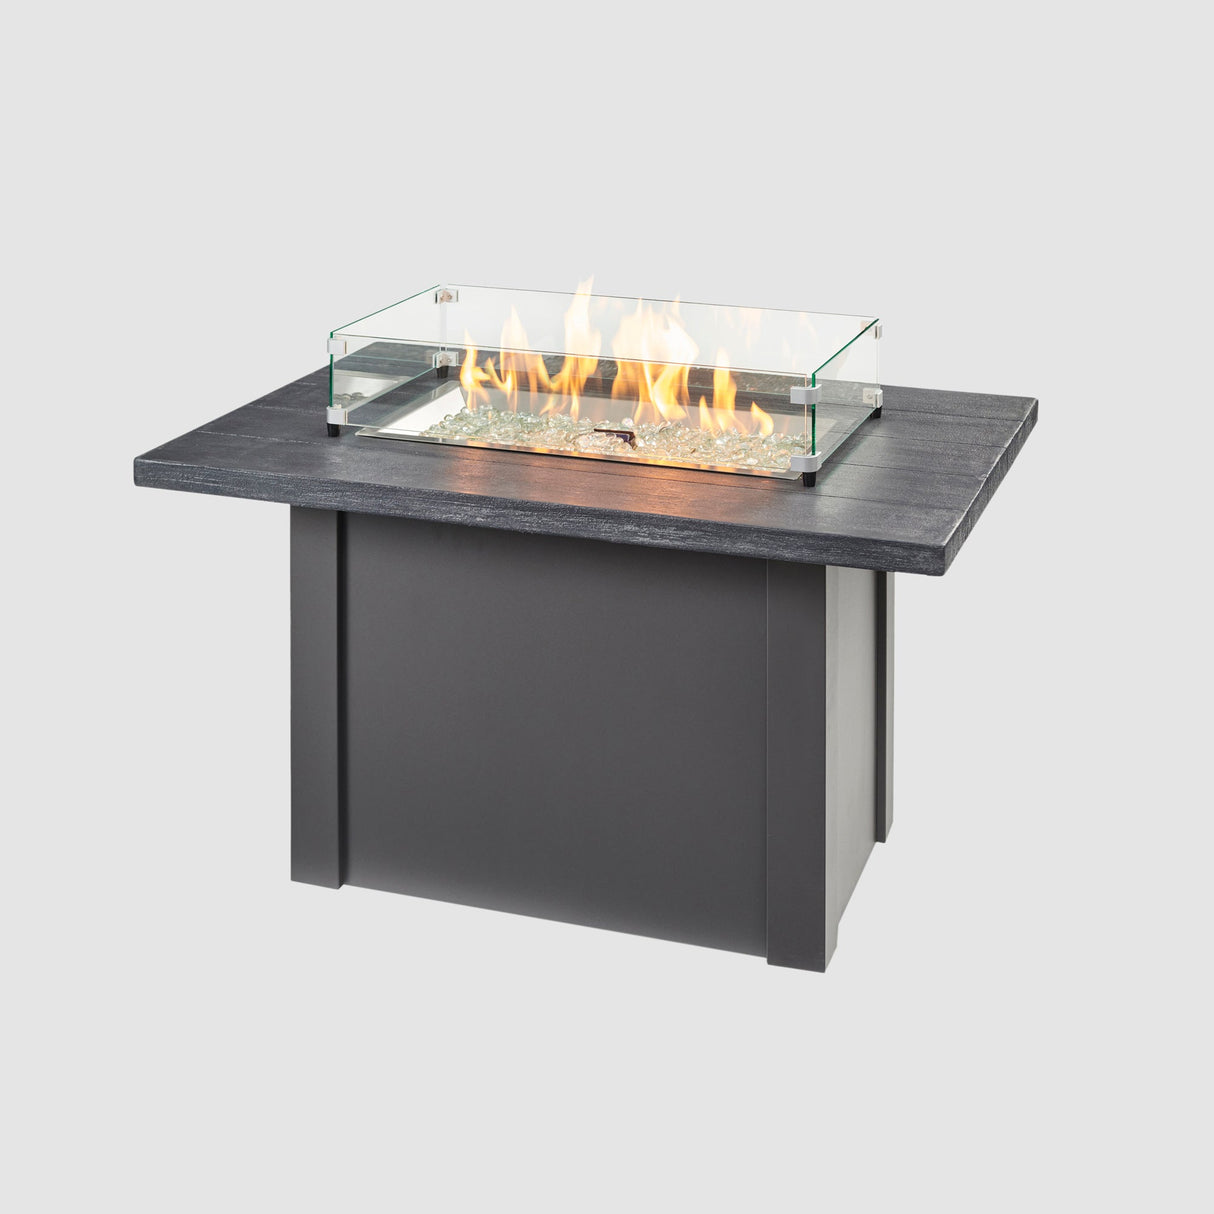 A glass wind guard place around the burner of a Havenwood Rectangular Gas Fire Pit Table with a Carbon Grey top and Graphite Grey base